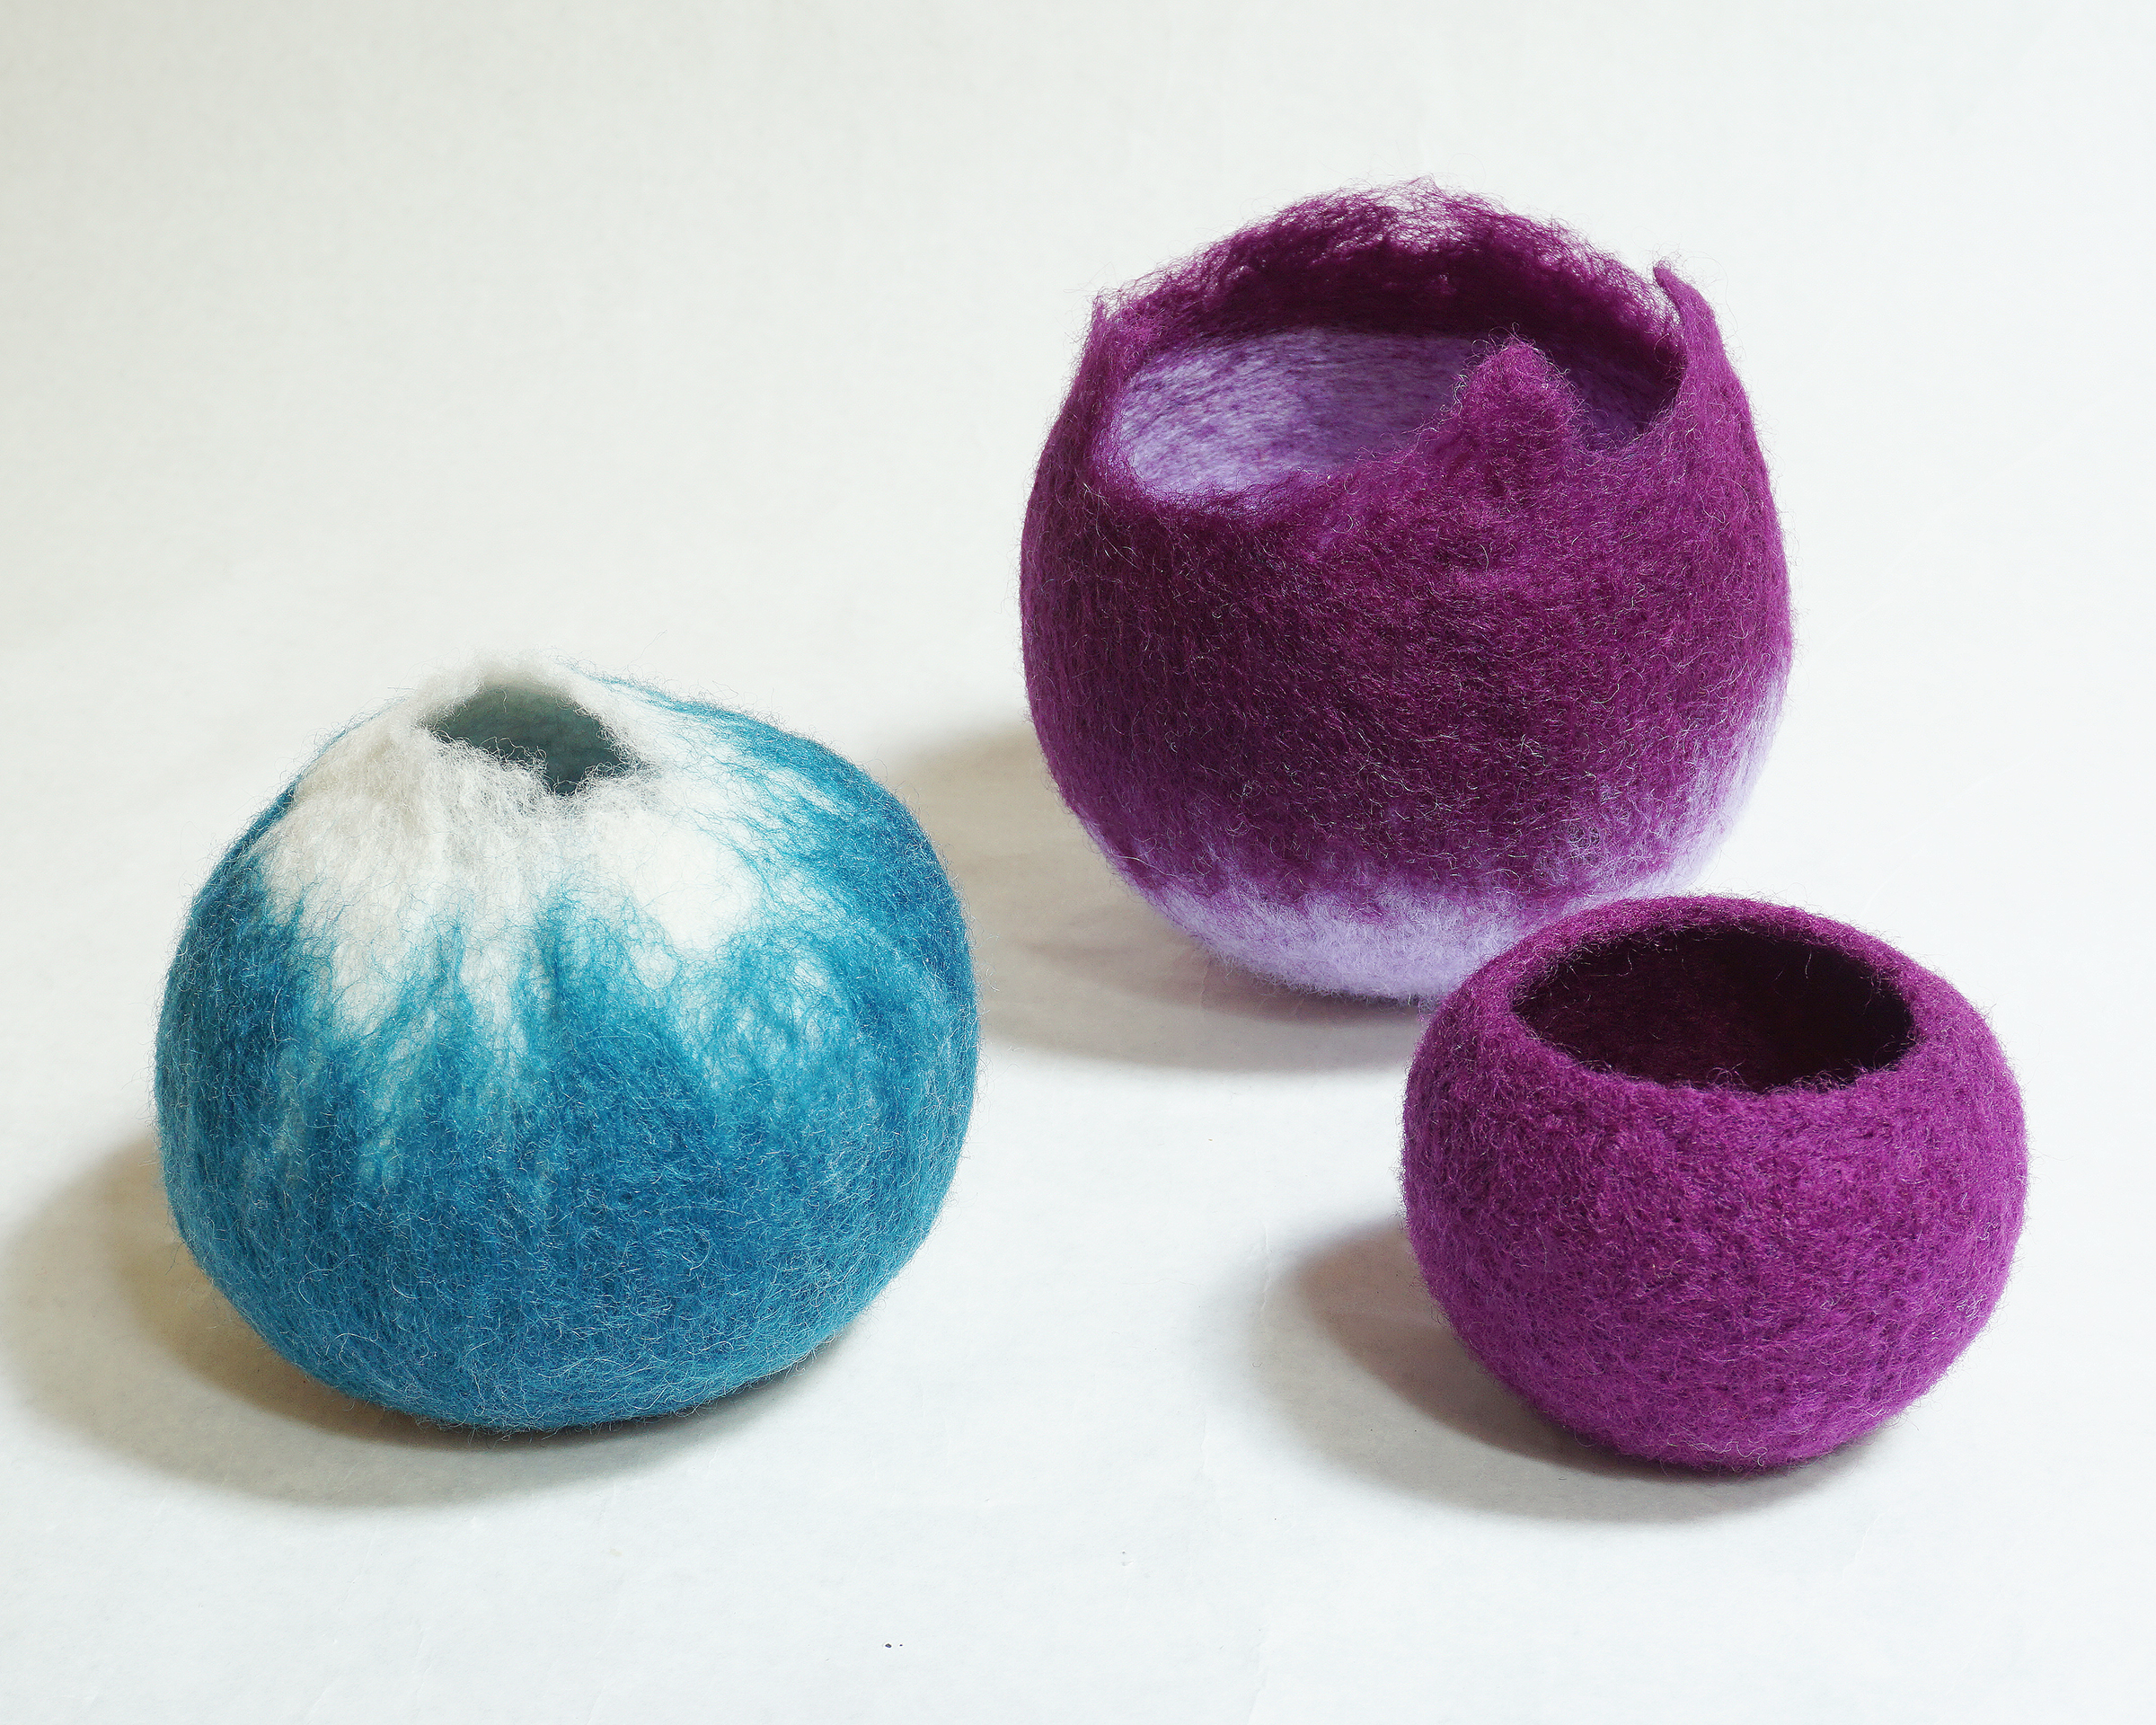 Vessels created by wet felt techniques over balloon form